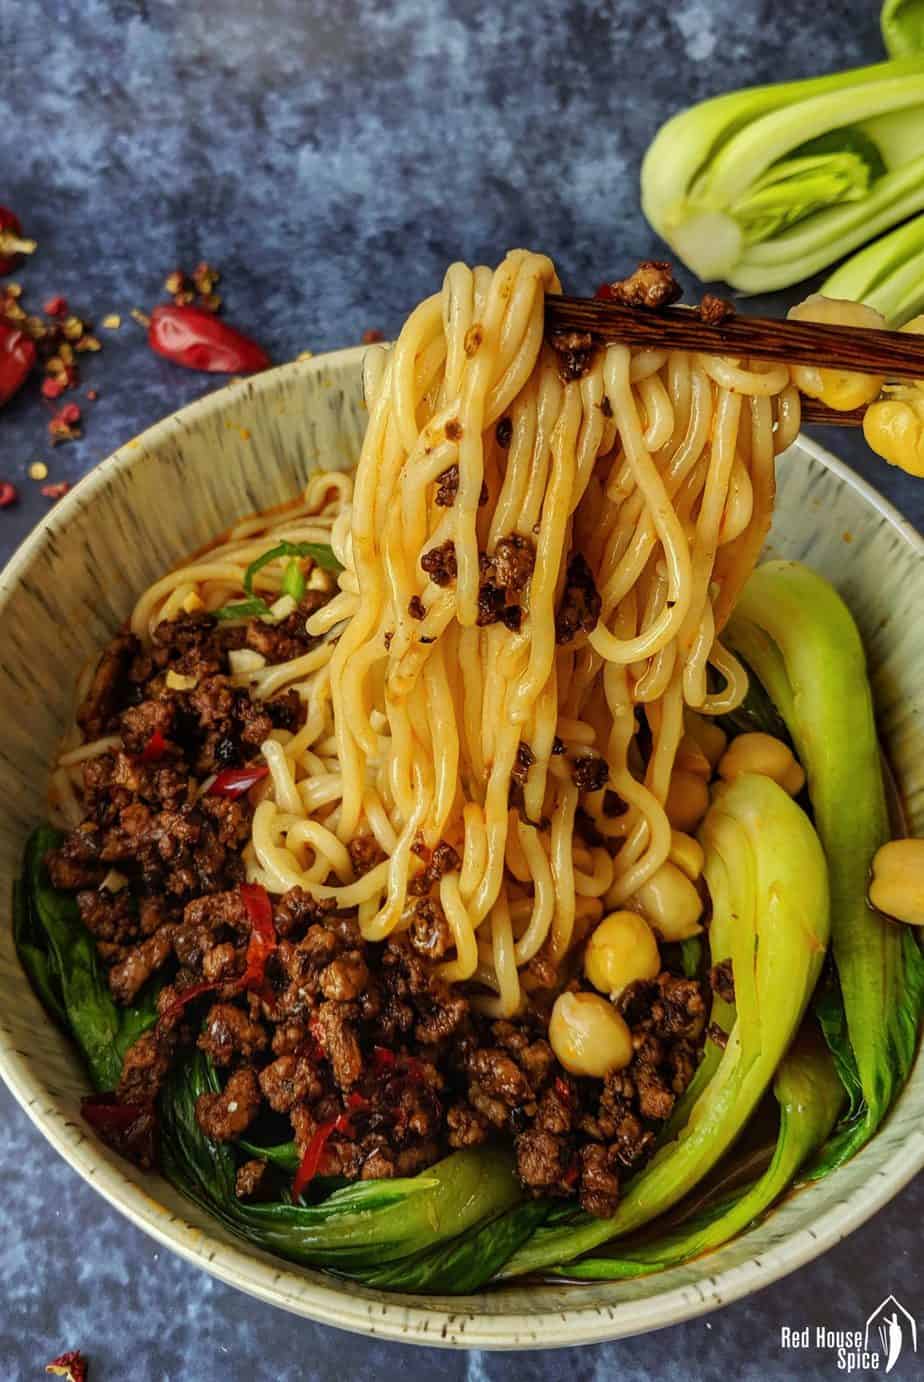 Chongqing noodles lifted up by a pair of chopsticks.